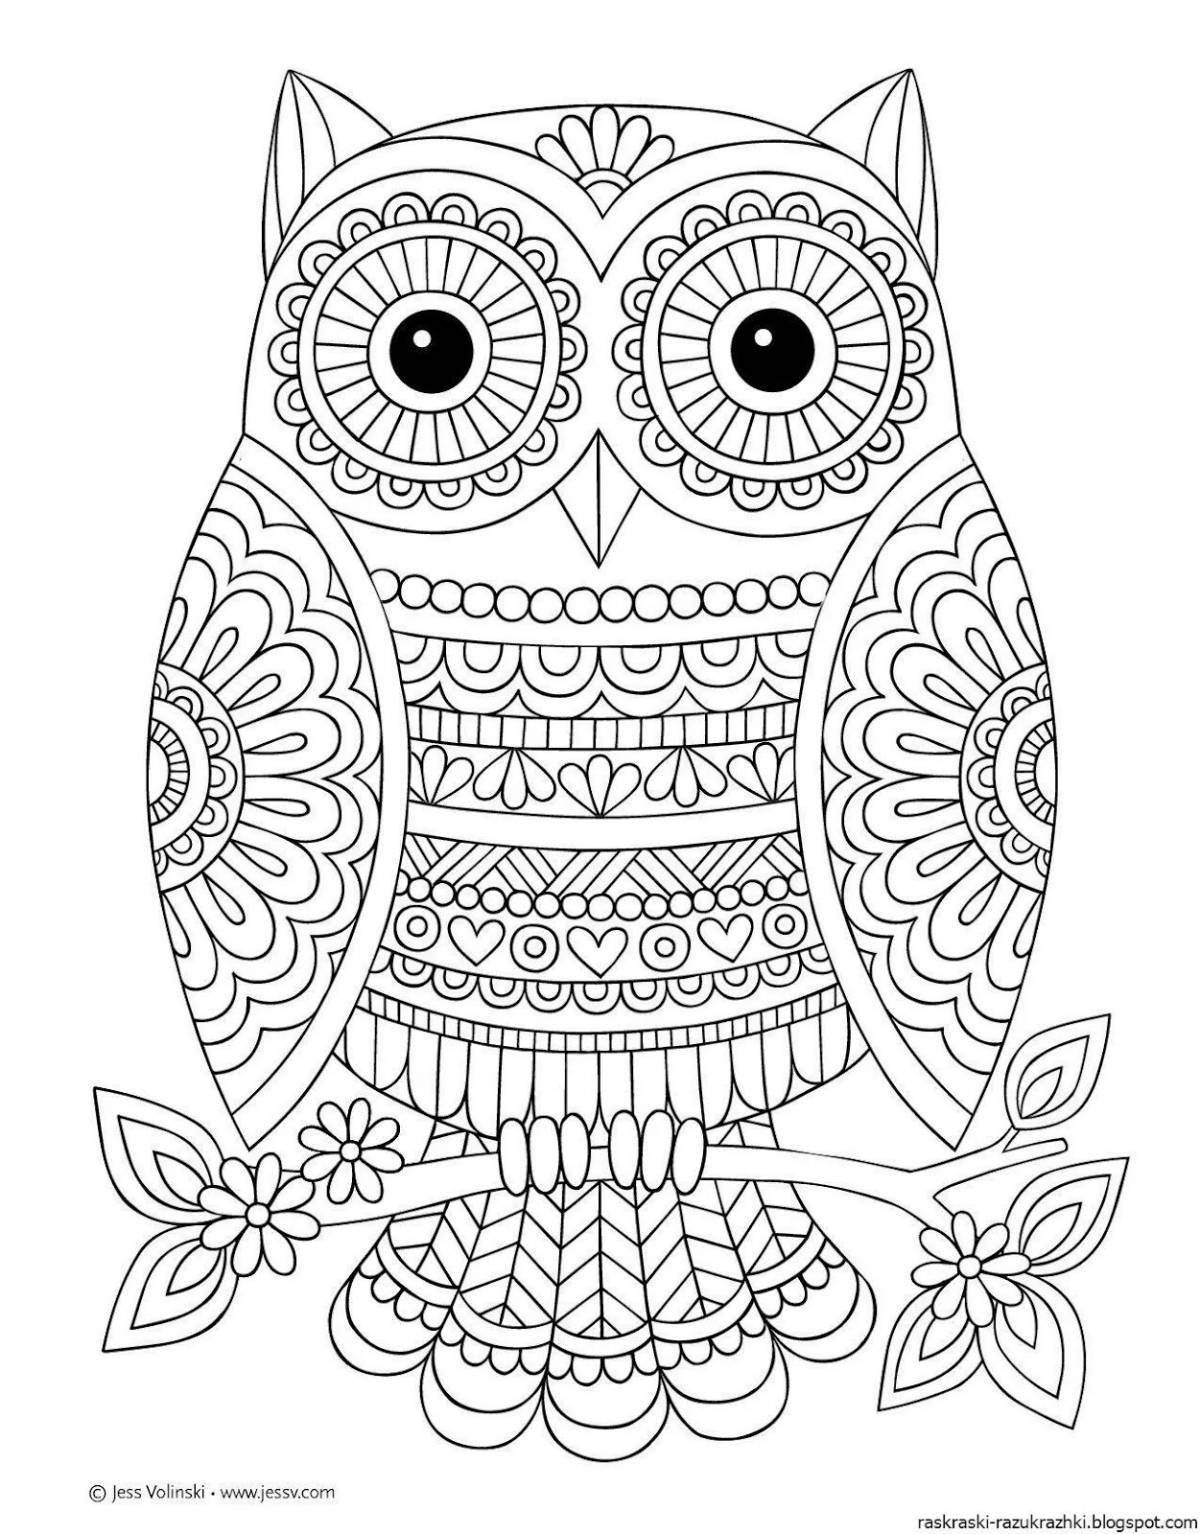 Inspiring anti-stress lung coloring book for girls